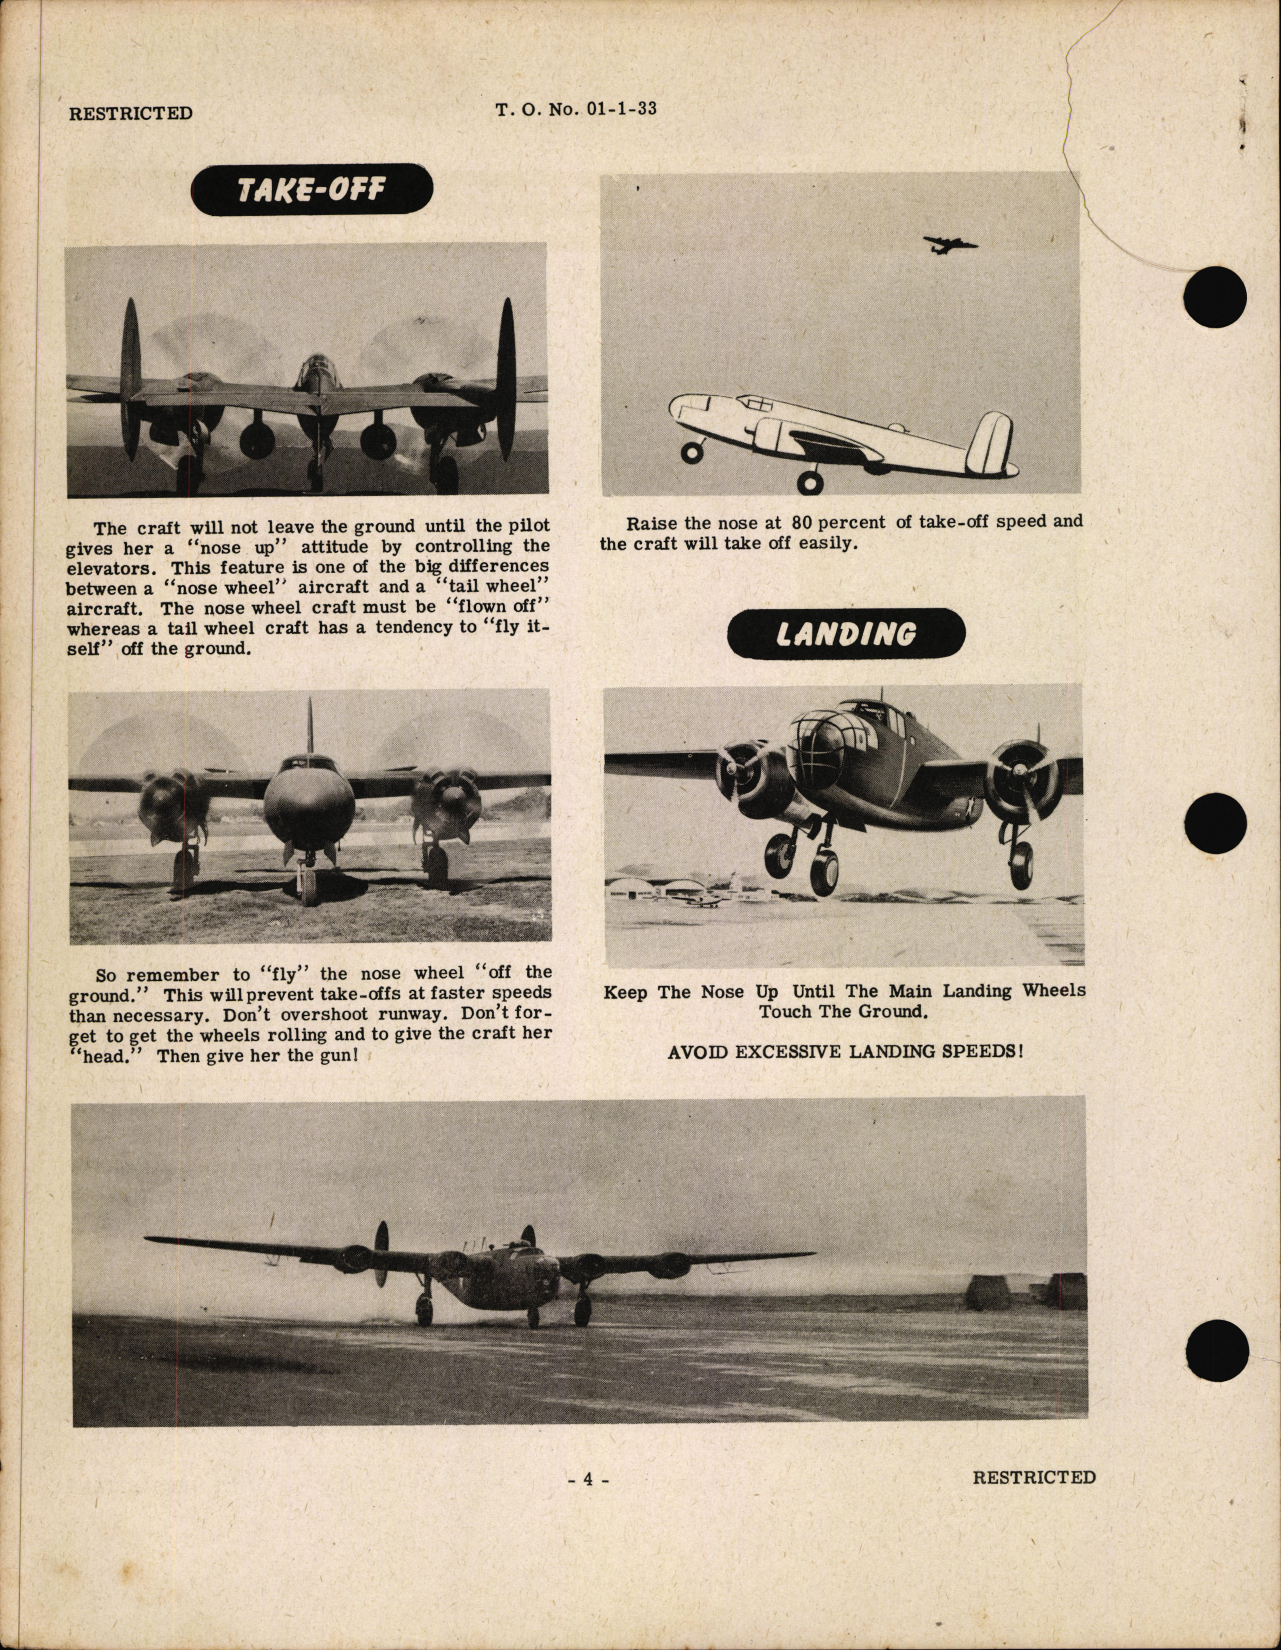 Sample page  4 from AirCorps Library document: Operation & Technique of Nose Wheel Airplanes, 01-1-33